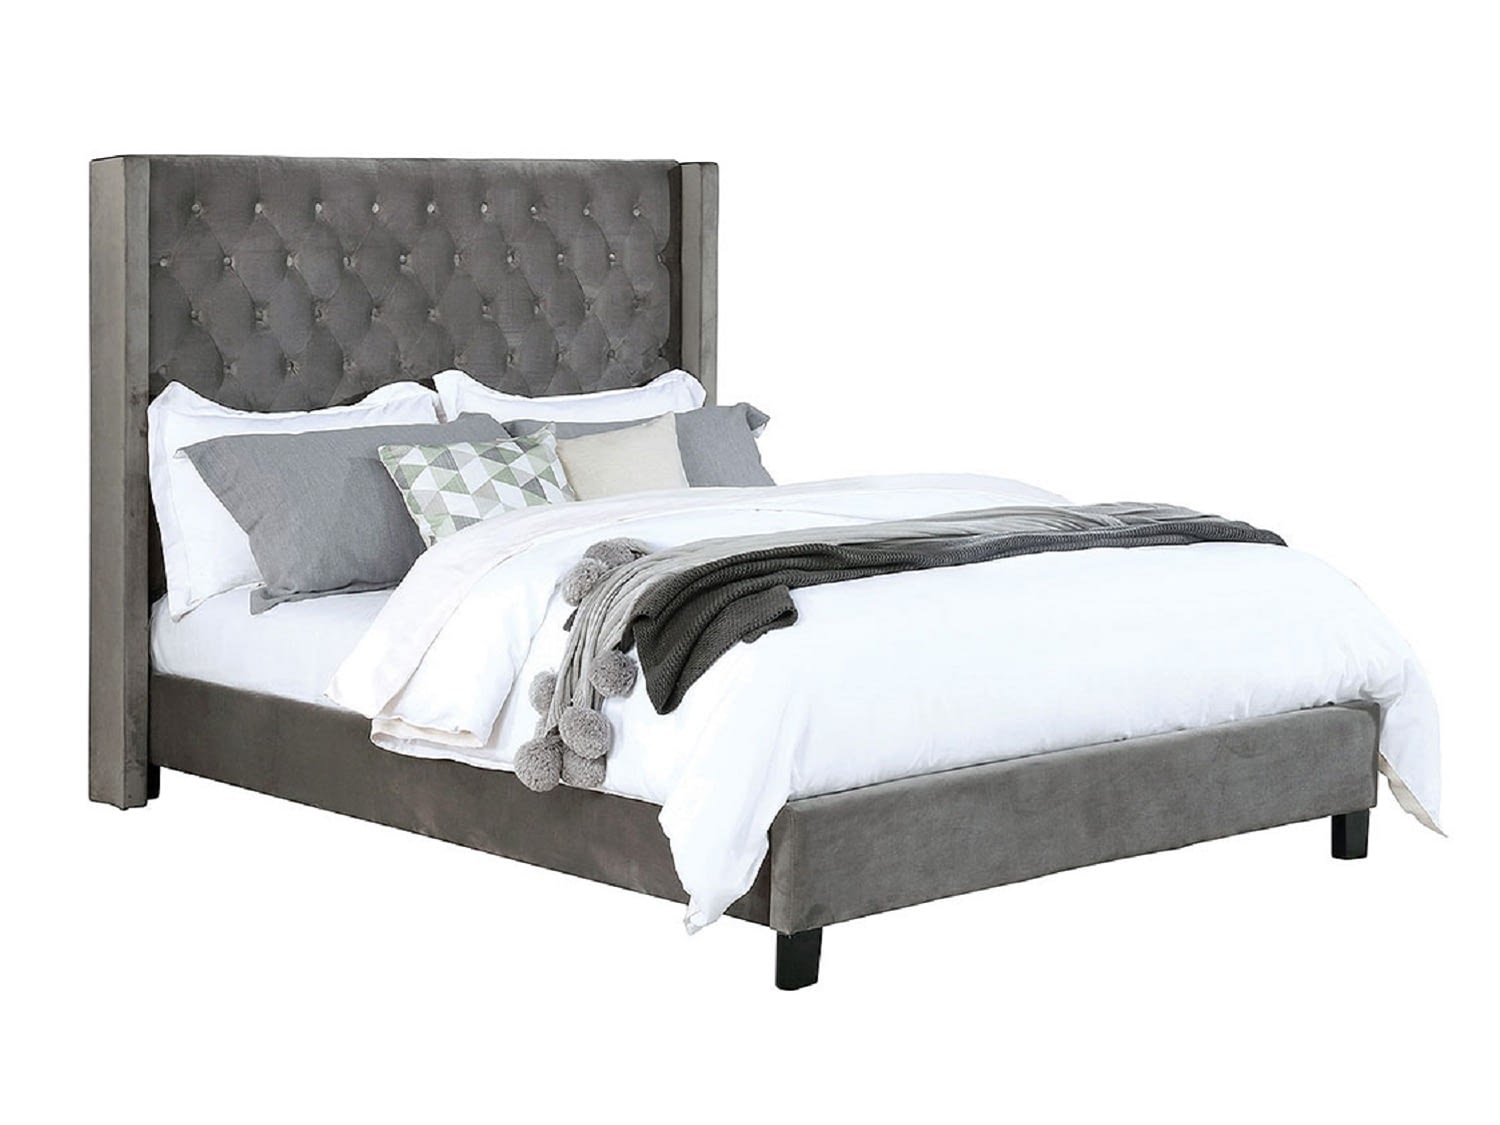 SOLON King Bed - Zoom